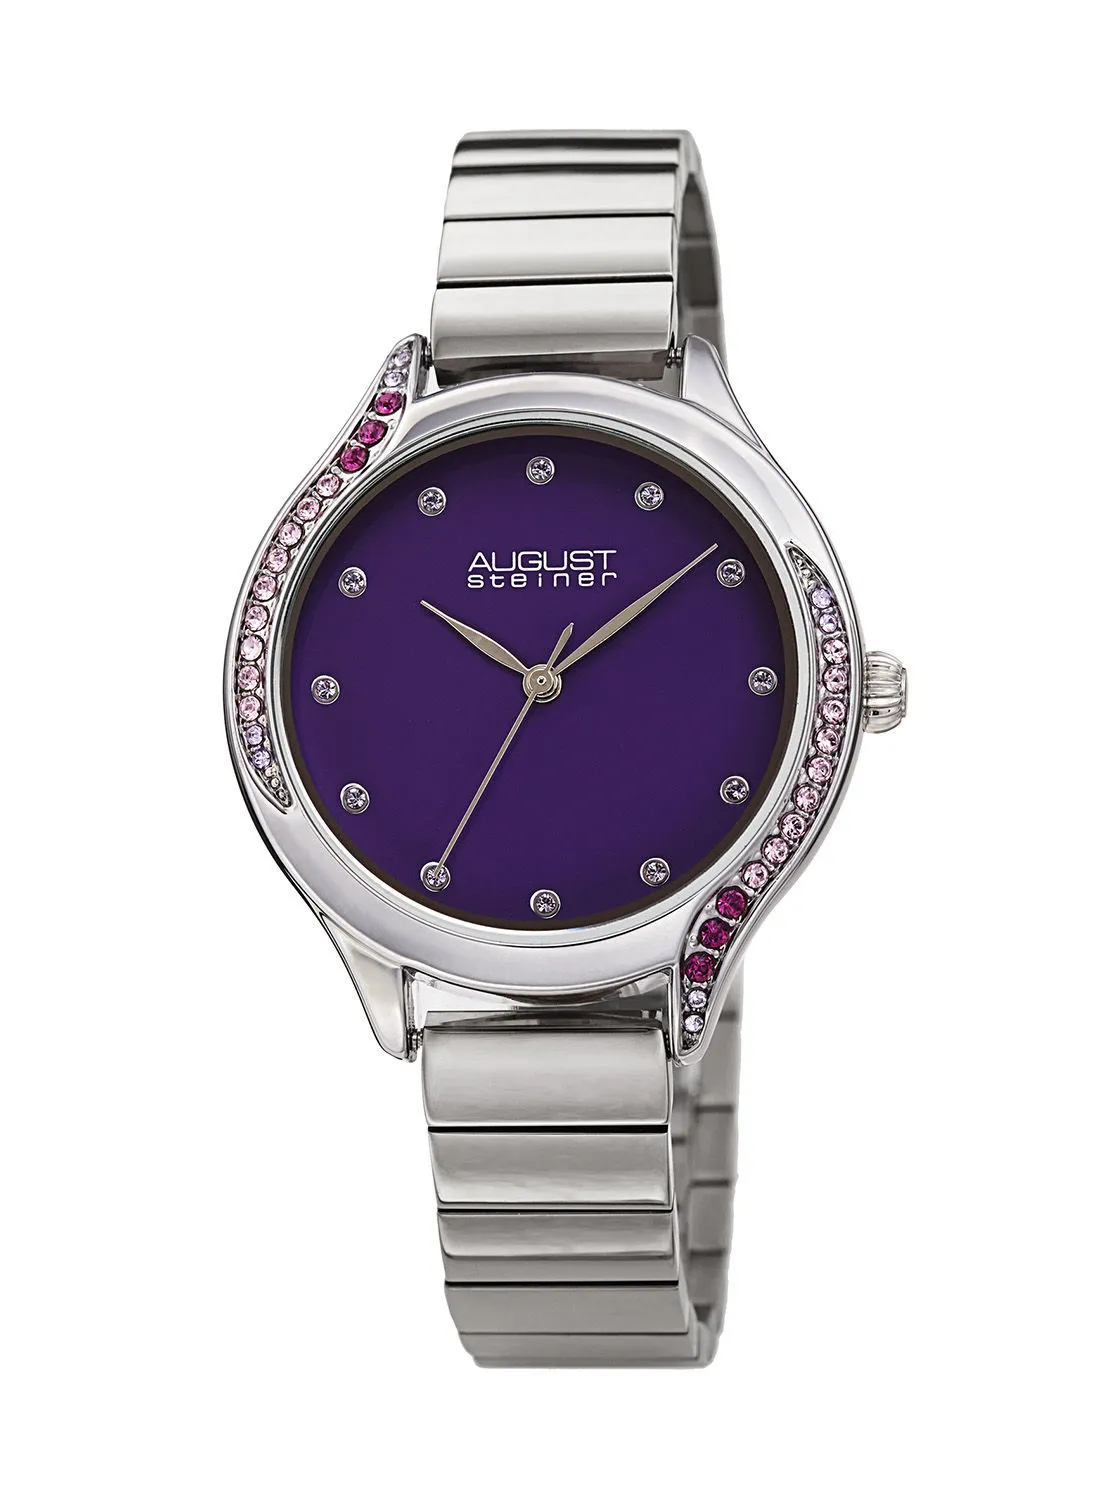 August Steiner Ion Plated Silver Tone Case, Purple Ombre Crystals on Bezel, Purple Dial, on a Silver Tone Link Bracelet